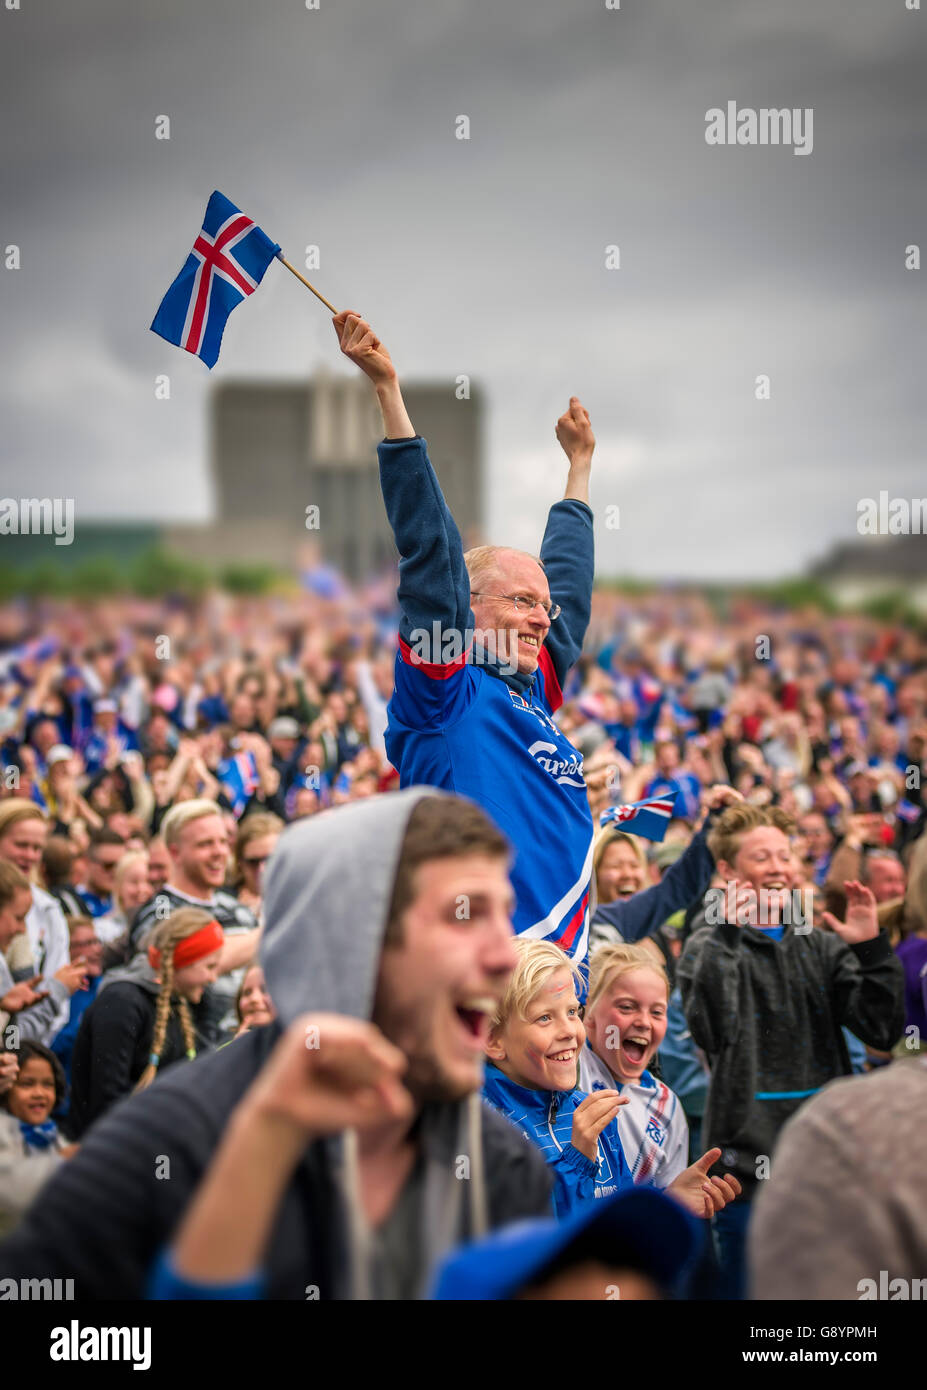 Crowds in downtown Reykjavik watching Iceland vs England in the UEFA Euro 2016 football tournament, Reykjavik, Iceland. Iceland won 2-1. June 27, 2016 Stock Photo